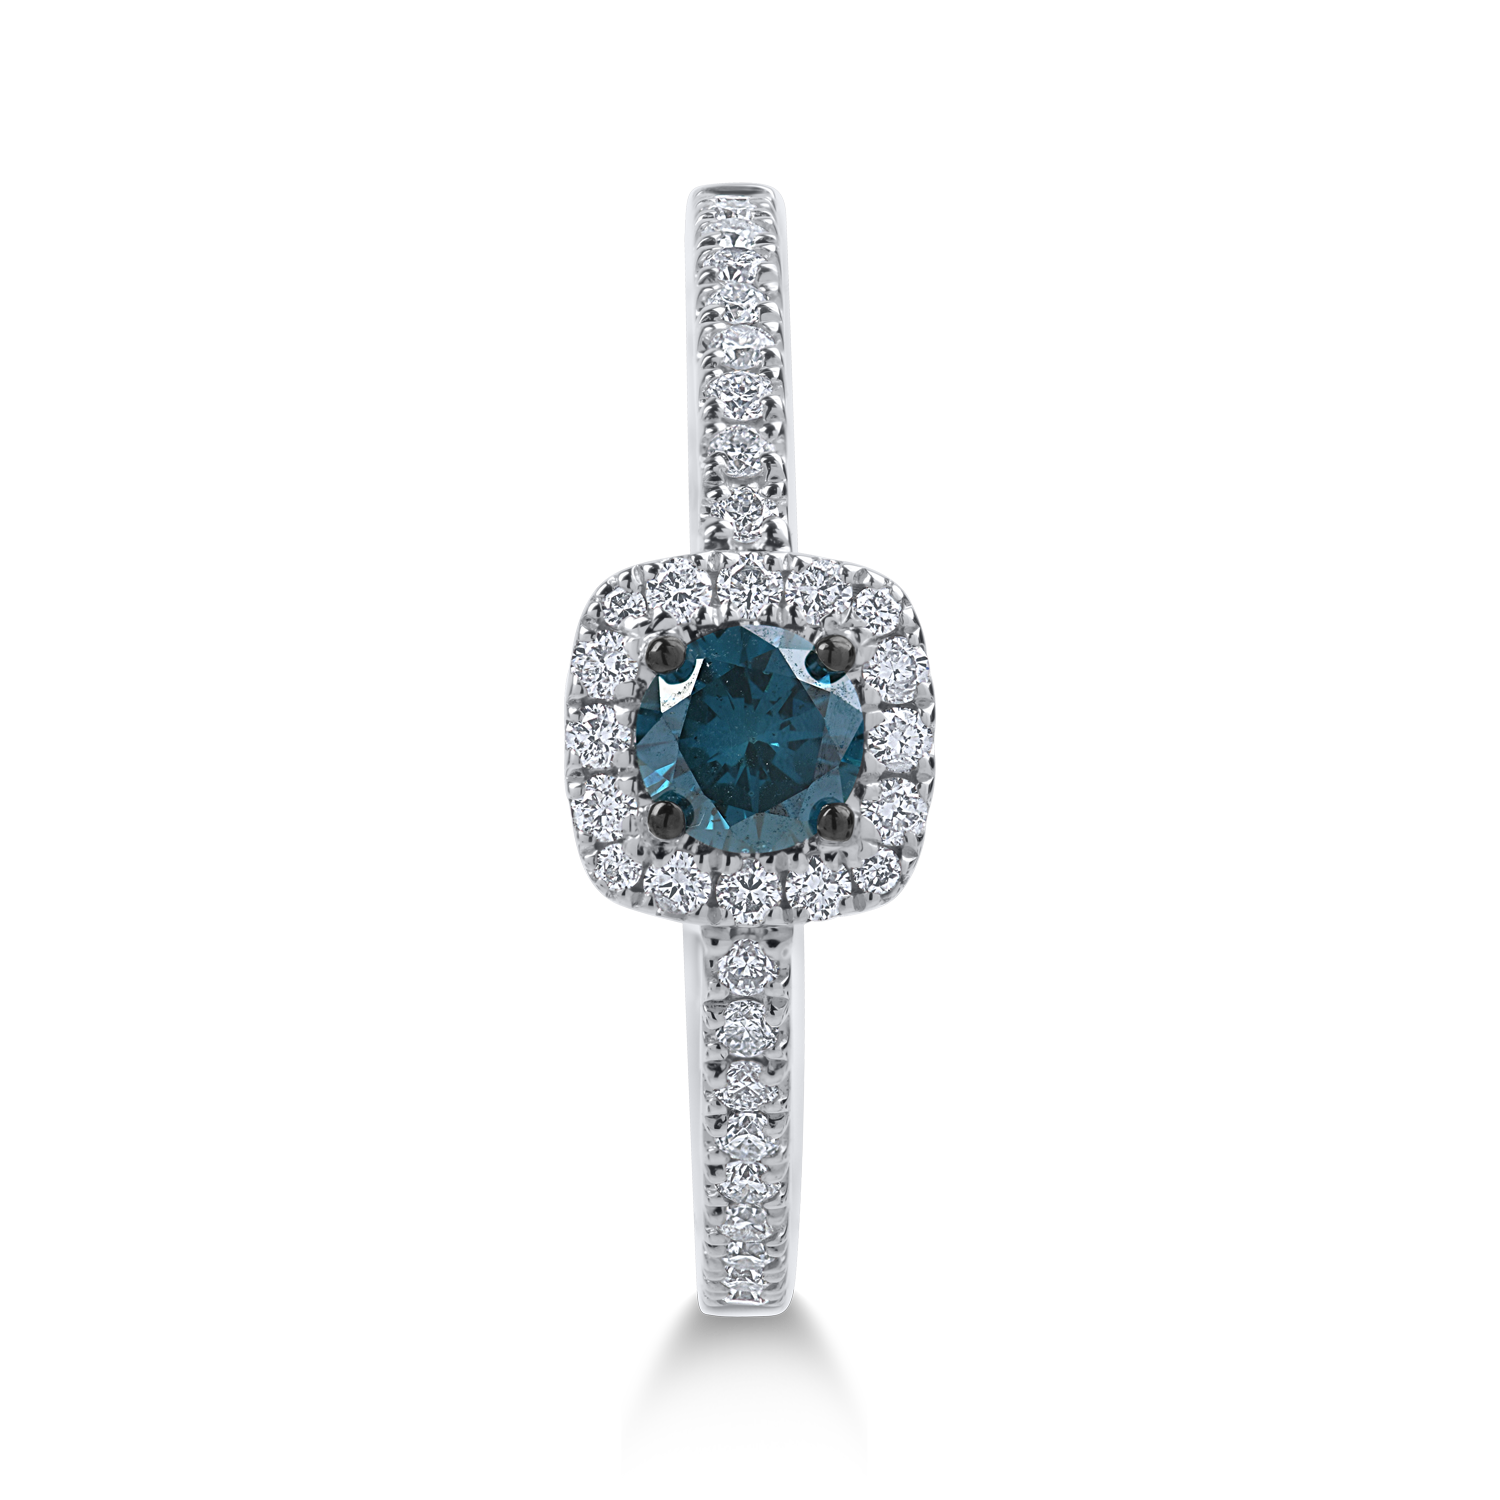 White gold ring with 0.24ct blue diamond and 0.23ct clear diamonds